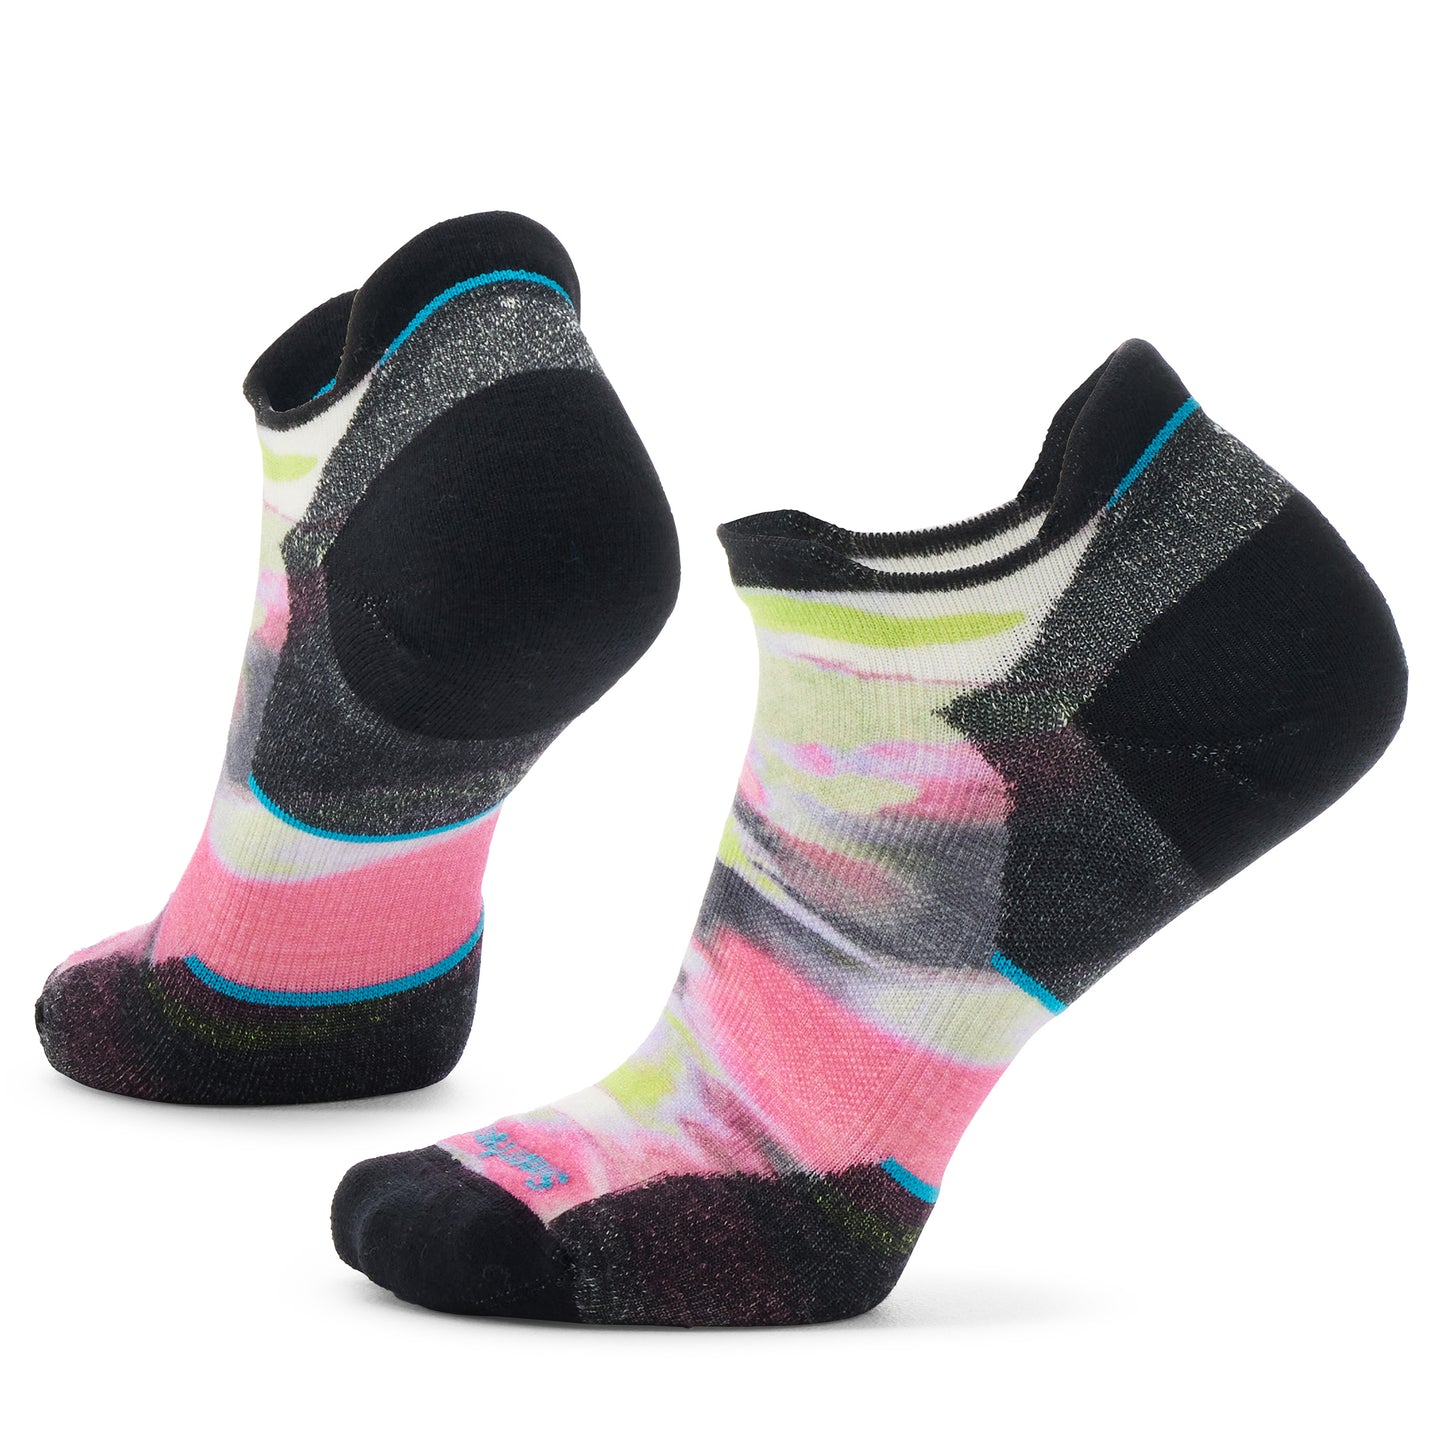 RUN TARGETED CUSHION BRUSHED PRINT LOW ANKLE SOCKS - WOMEN'S